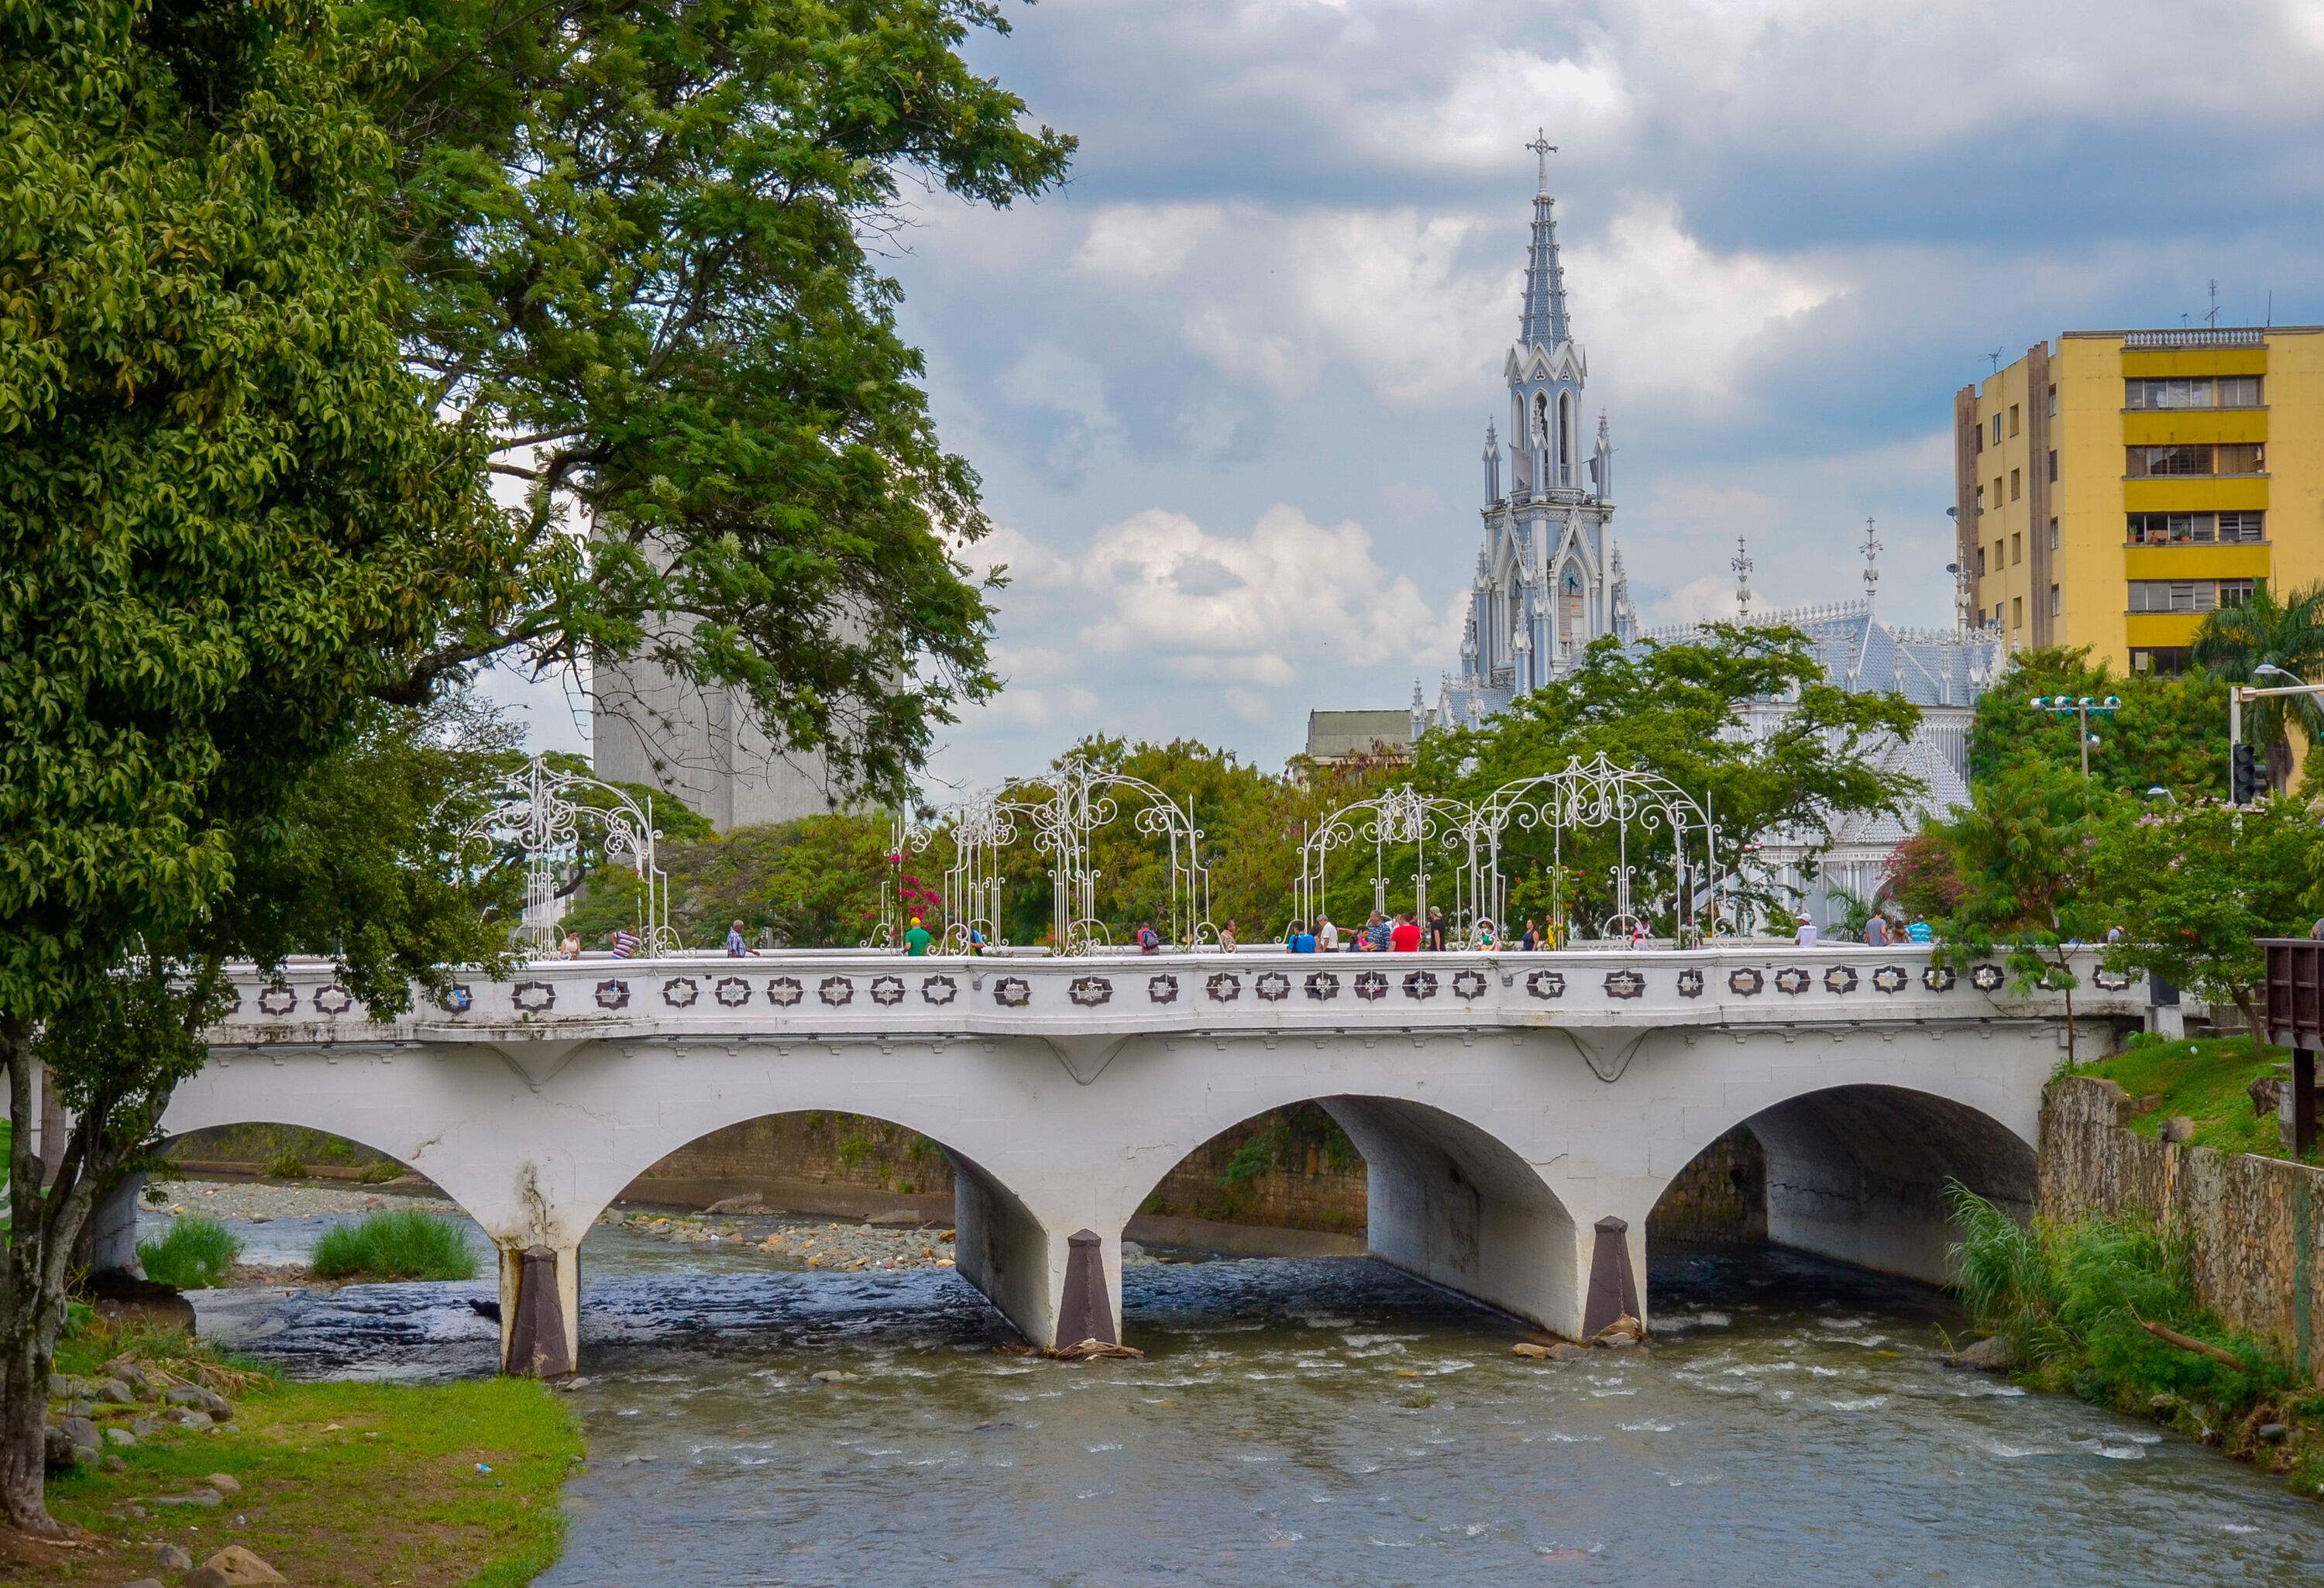 Pedestrians cross a white arch bridge across a calm river with views of a towering church steeple in the background.